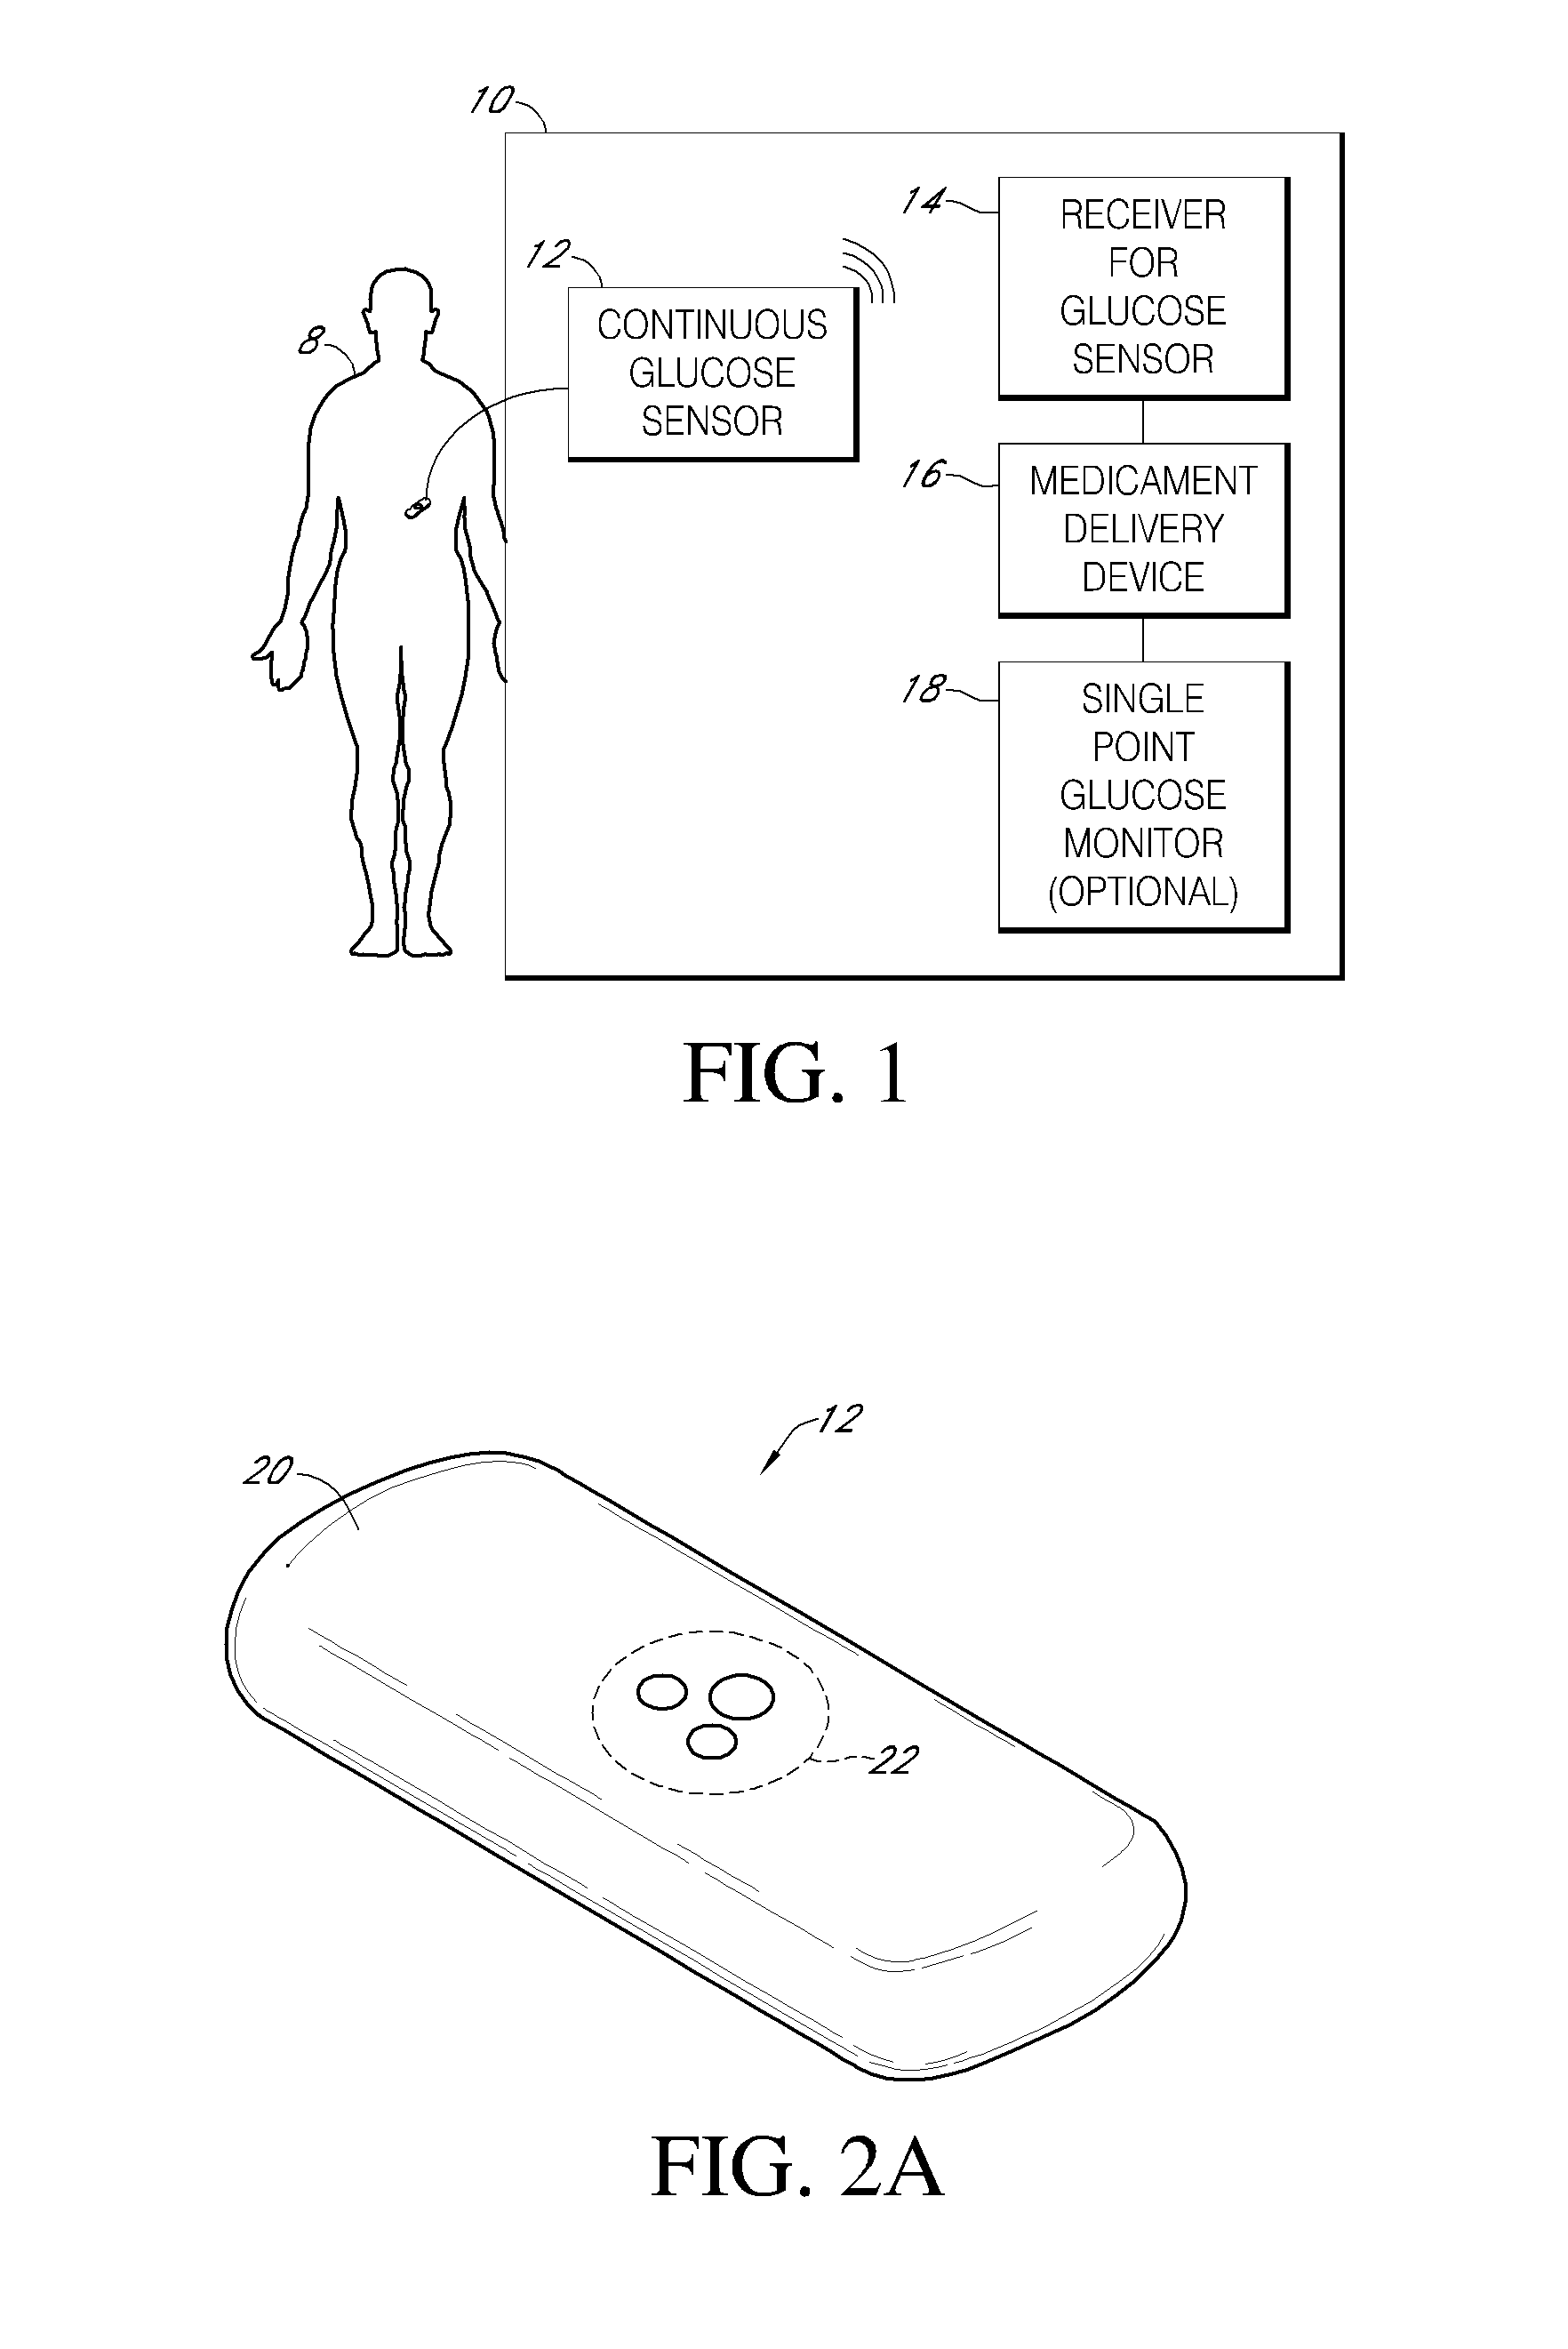 Integrated insulin delivery system with continuous glucose sensor